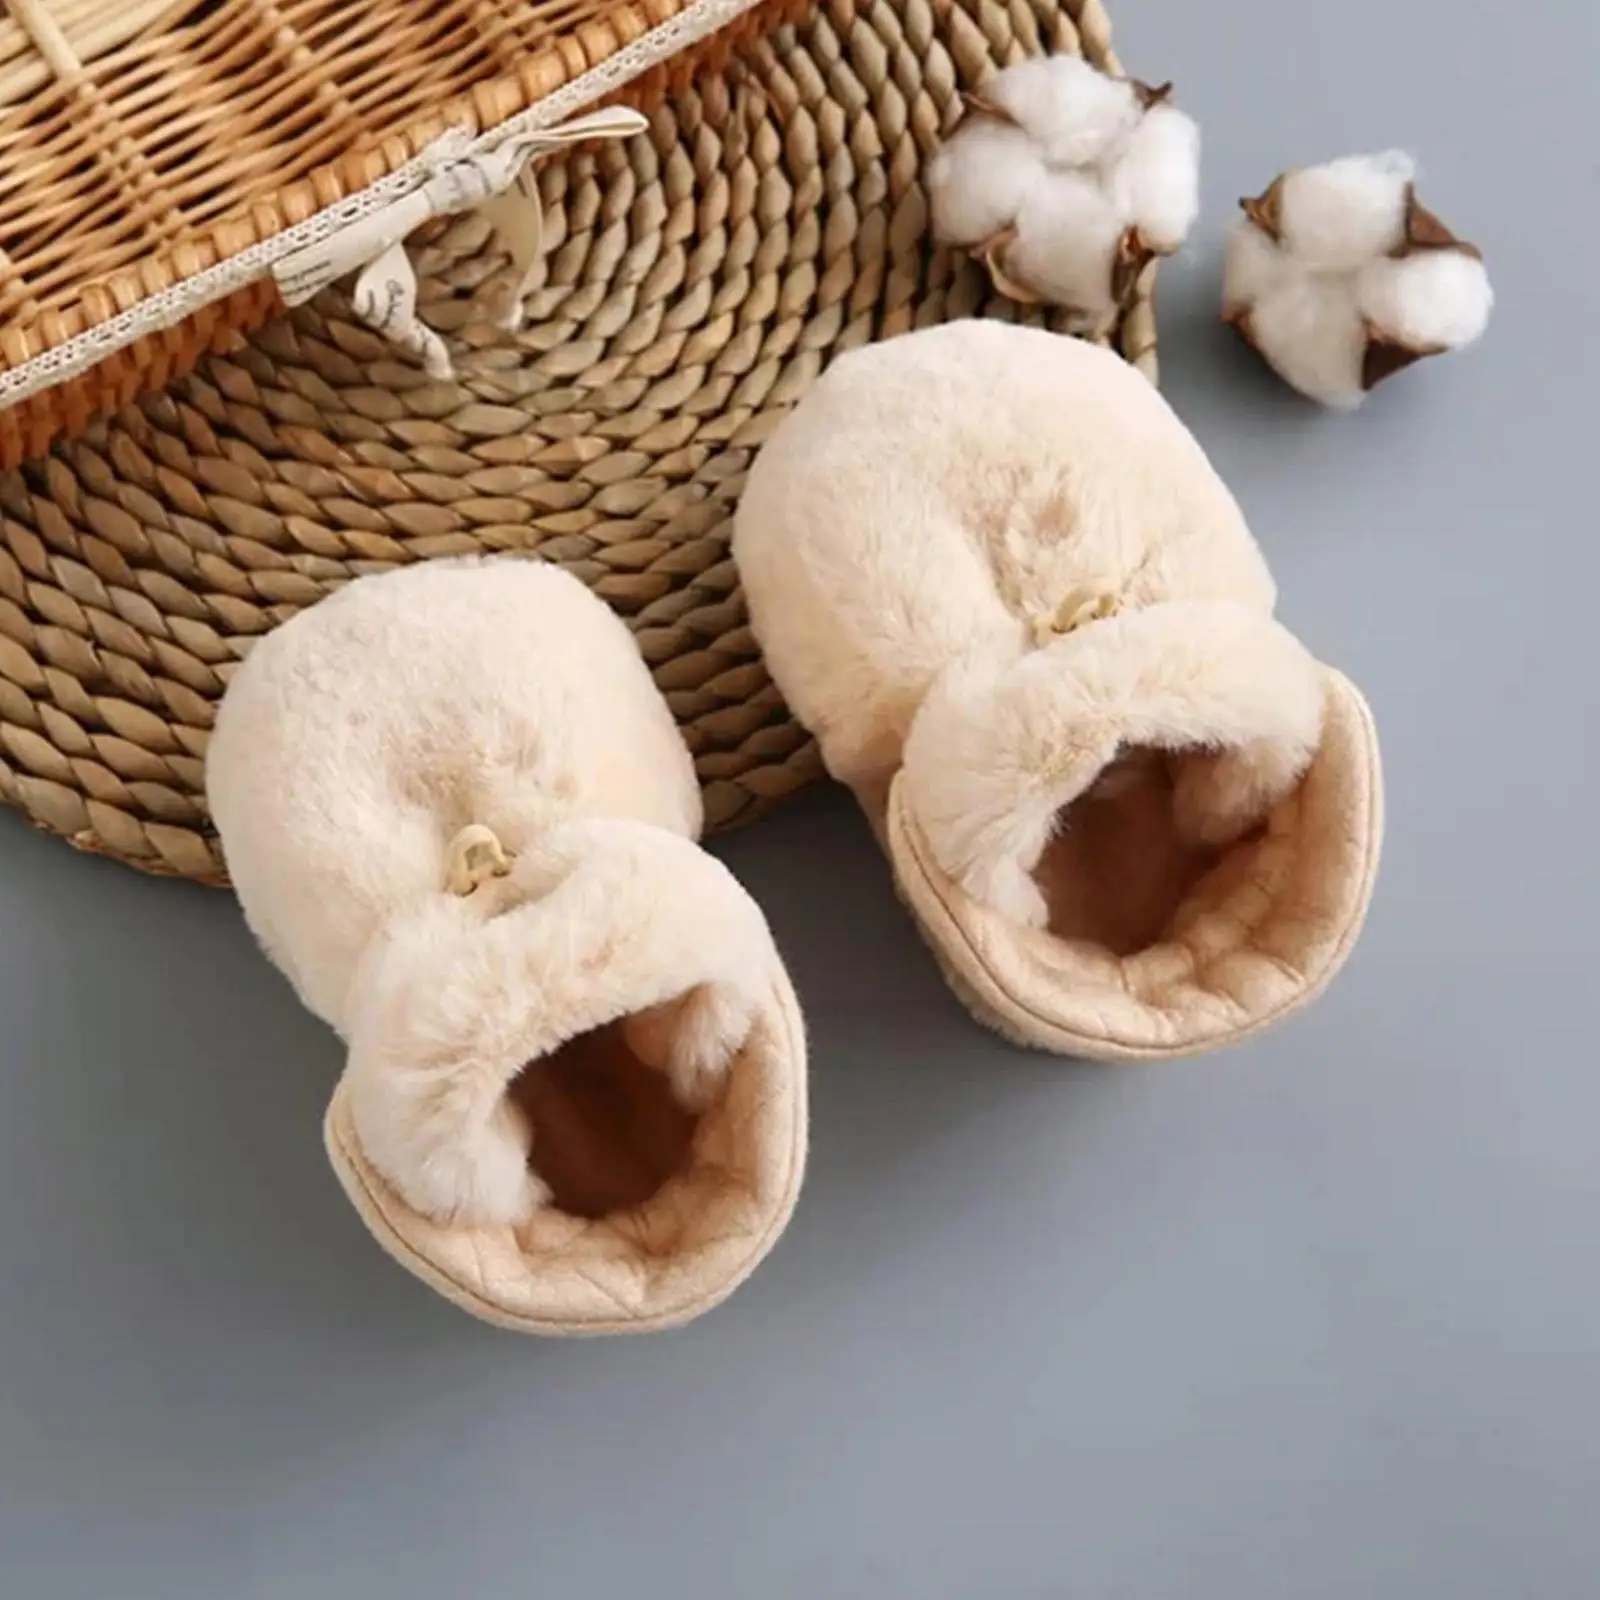 

Baby Socks Winter Baby Boy Girl Booties Fluff Soft Moccasin Anti-slip Walkers Warm First Crib Toddler Infant Shoes Shoes Ne H2d8